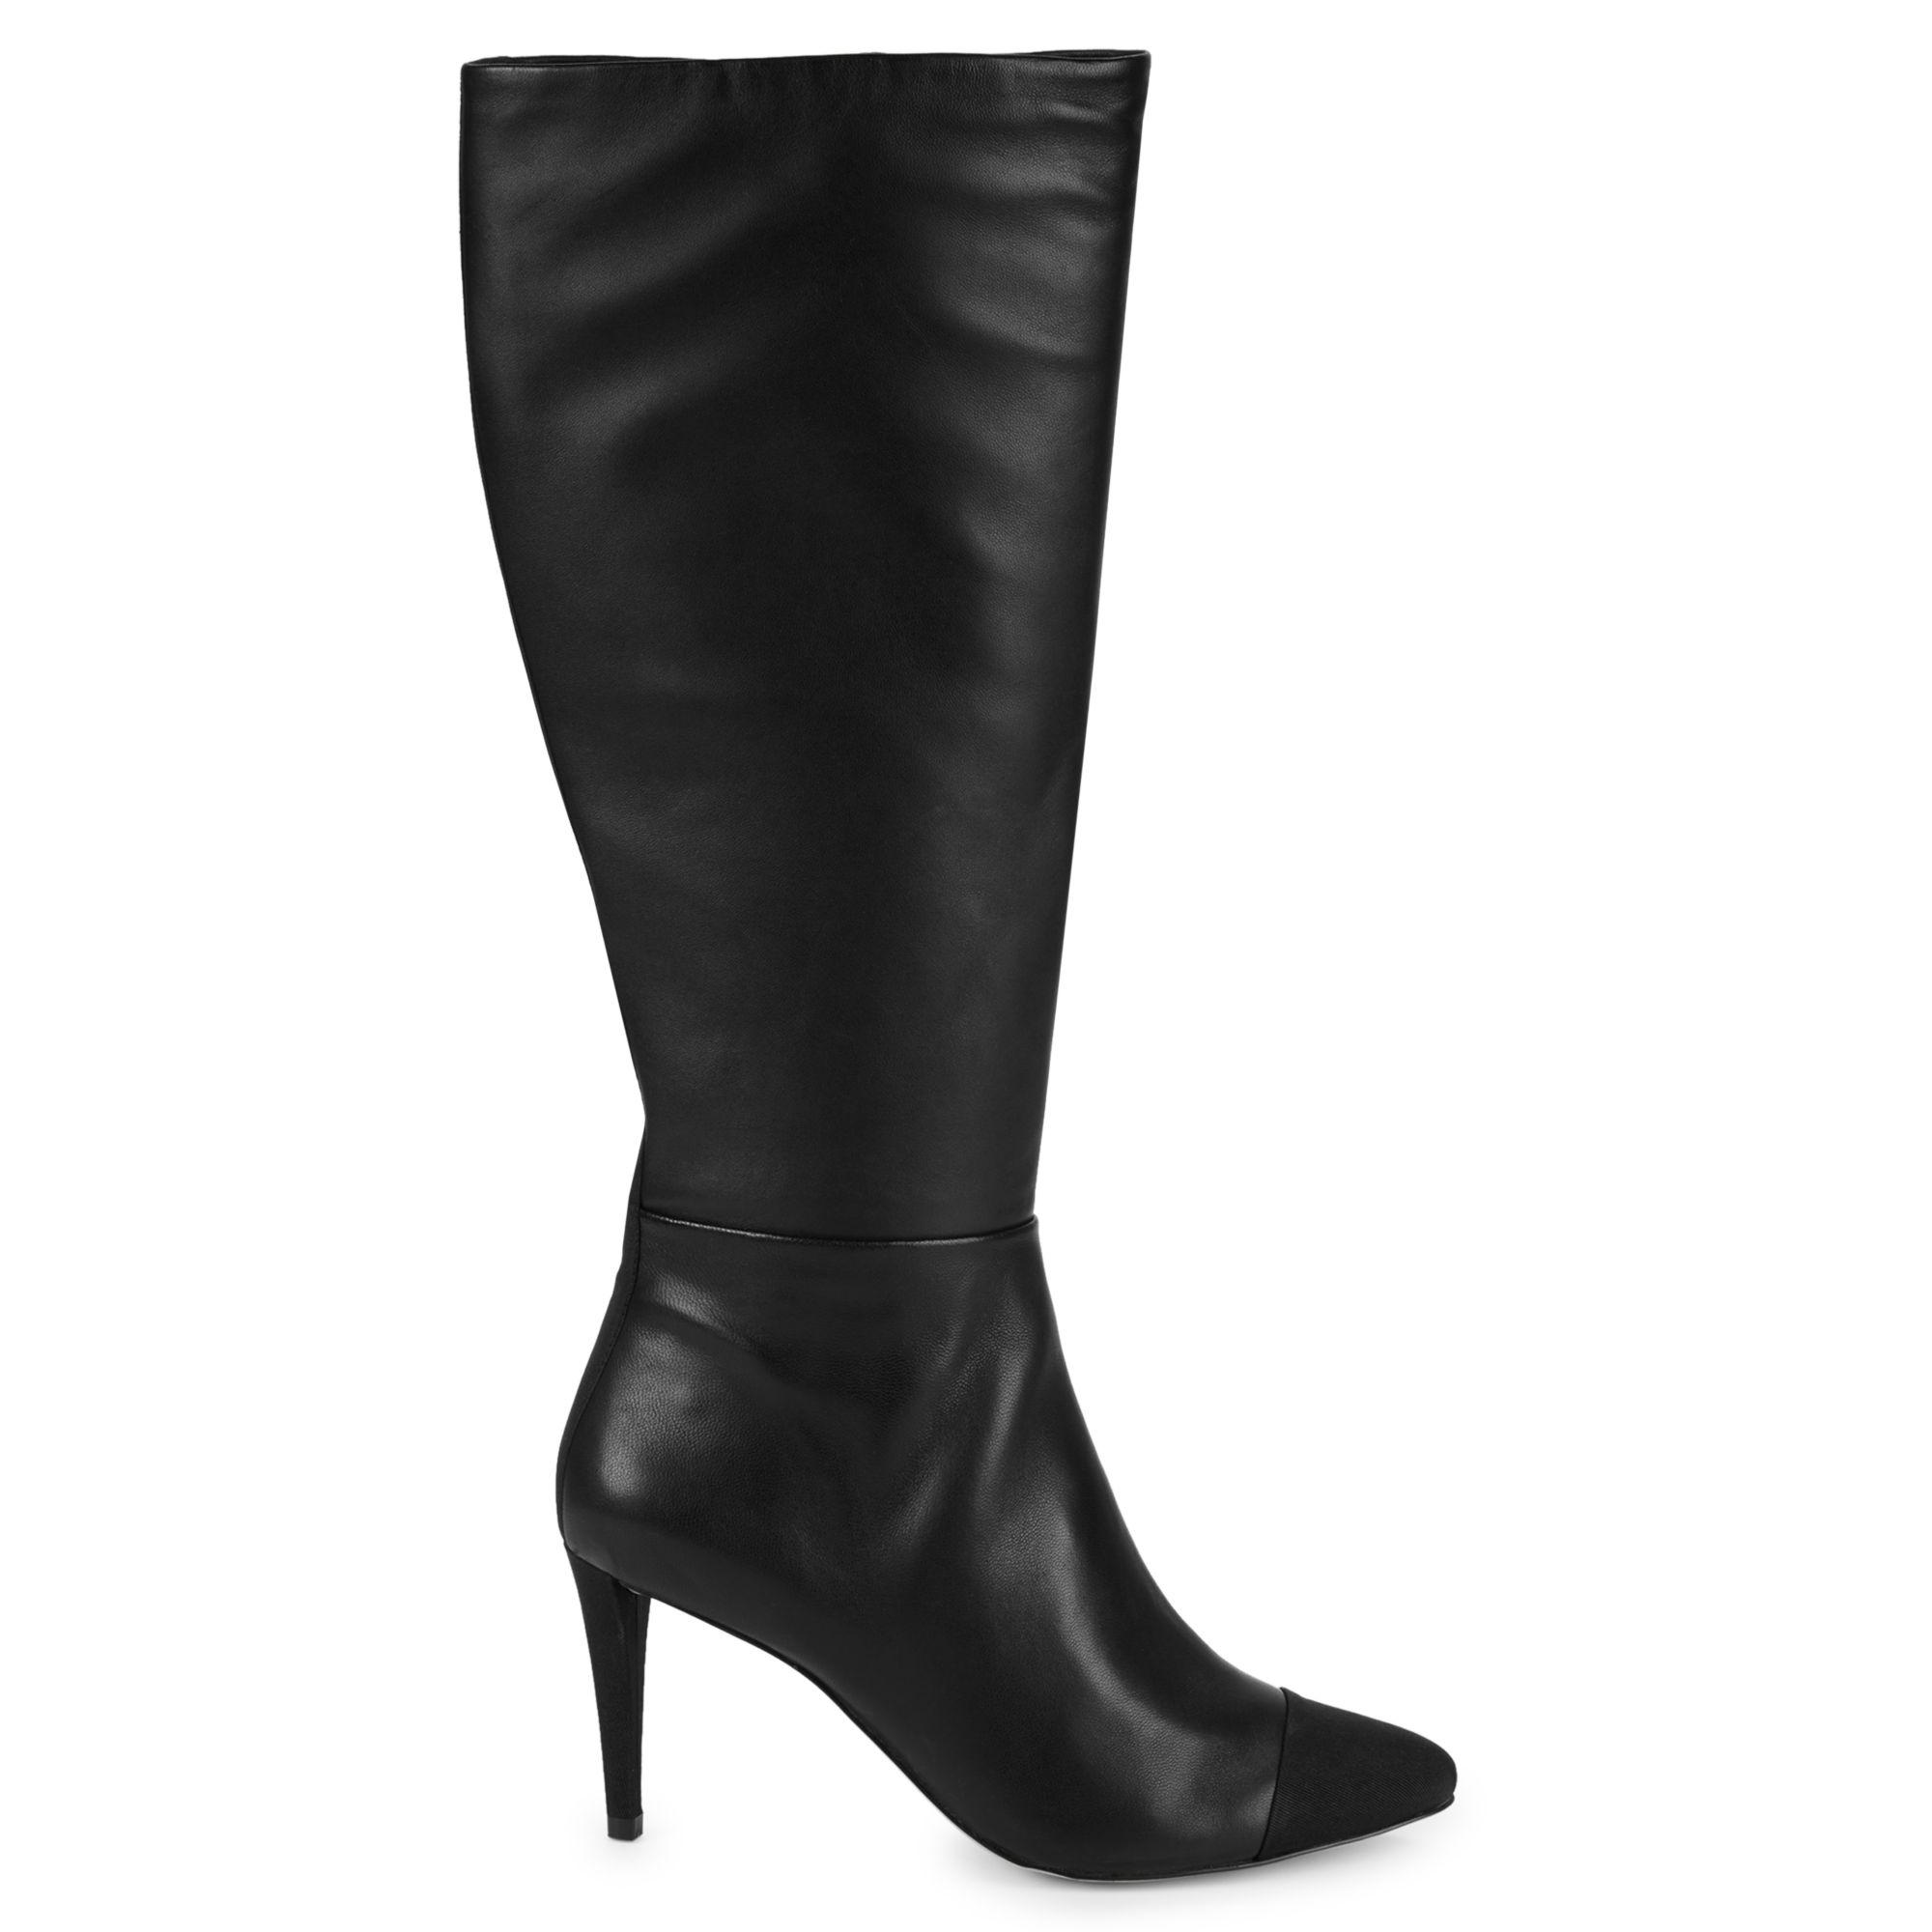 Karl Lagerfeld Knee-high Leather Tall Boots in Black - Lyst